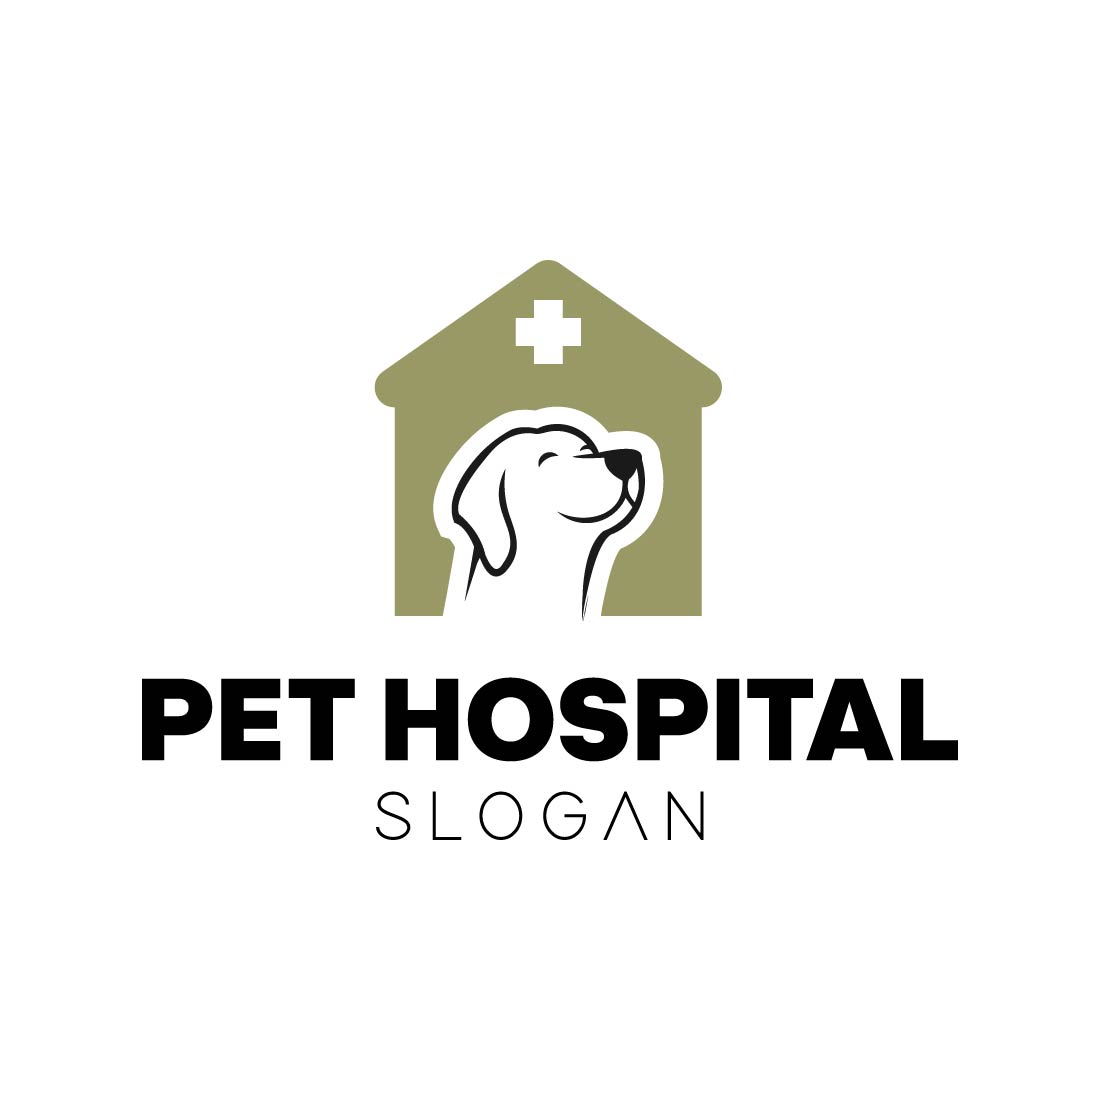 Pet Hospital Logo Vector for yor projects.